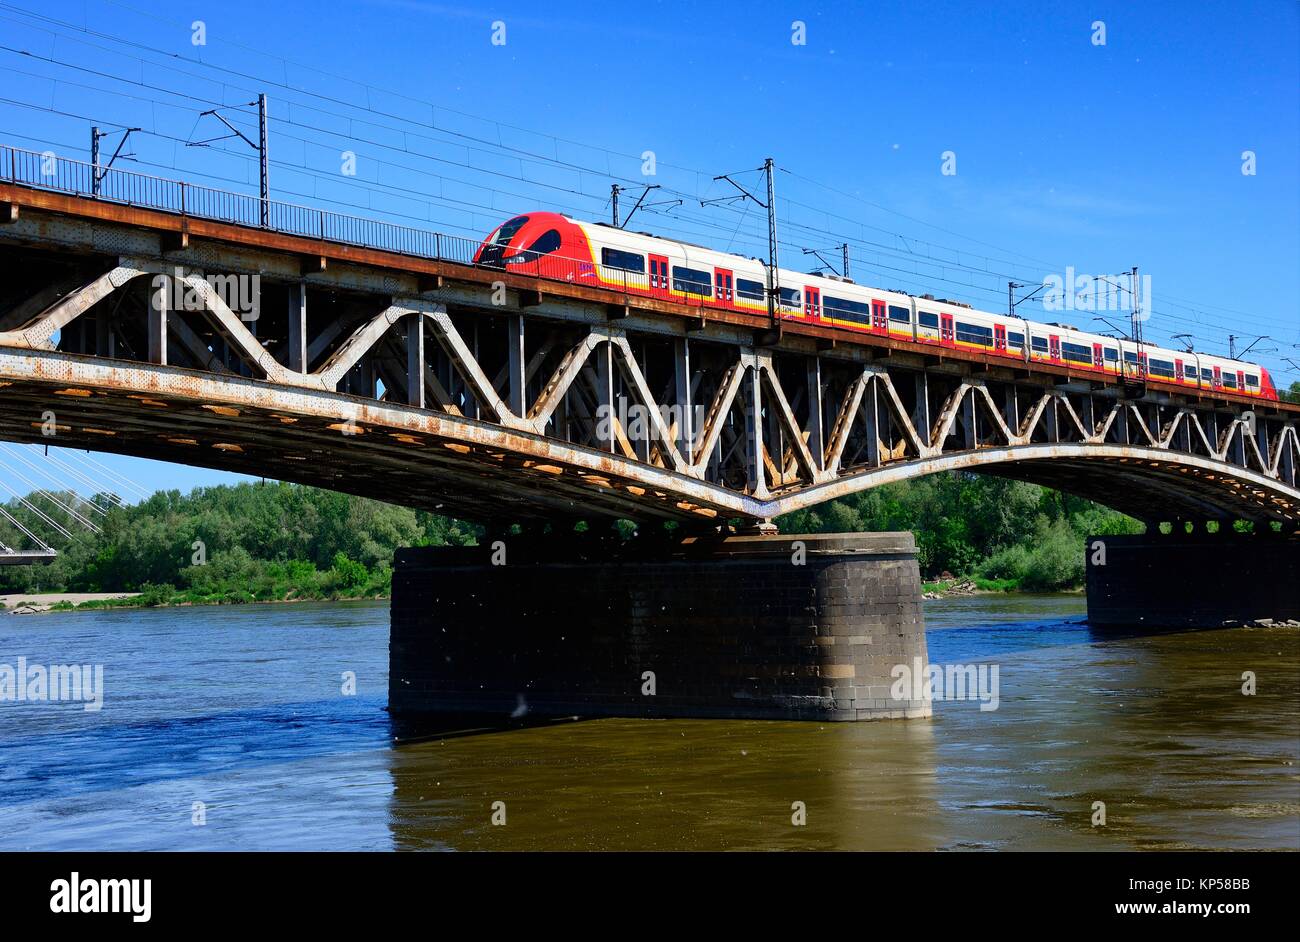 Srednicowy Bridge - rail bridge over the Vistula River in Warsaw, seen from western side of Vistula, May is the main period of dusting of oaks - here Stock Photo